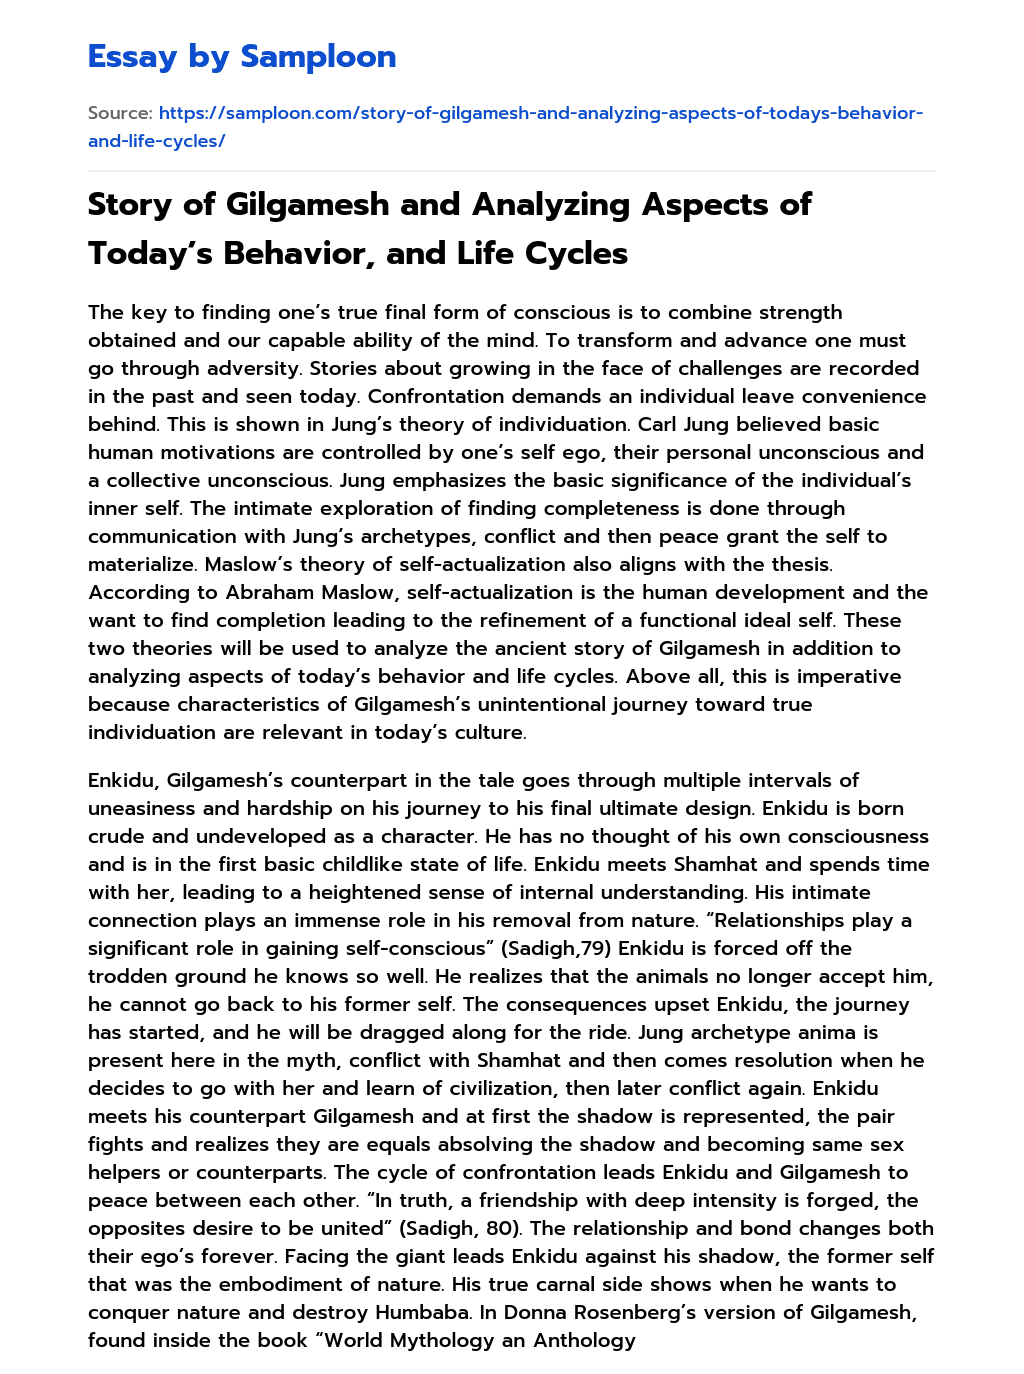 Story of Gilgamesh and Analyzing Aspects of Today’s Behavior, and Life Cycles essay